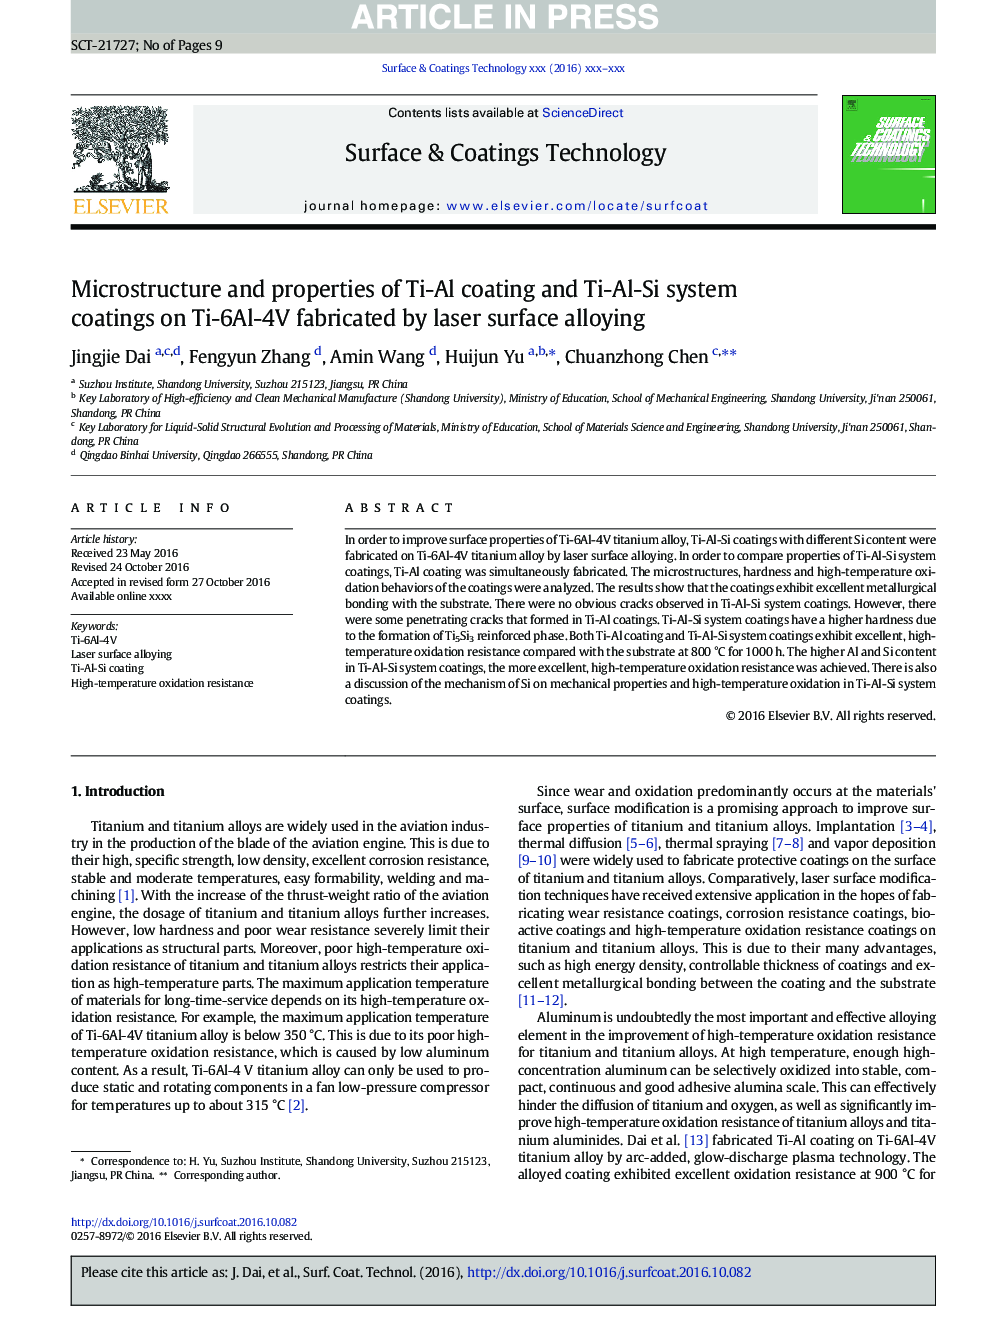 Microstructure and properties of Ti-Al coating and Ti-Al-Si system coatings on Ti-6Al-4V fabricated by laser surface alloying